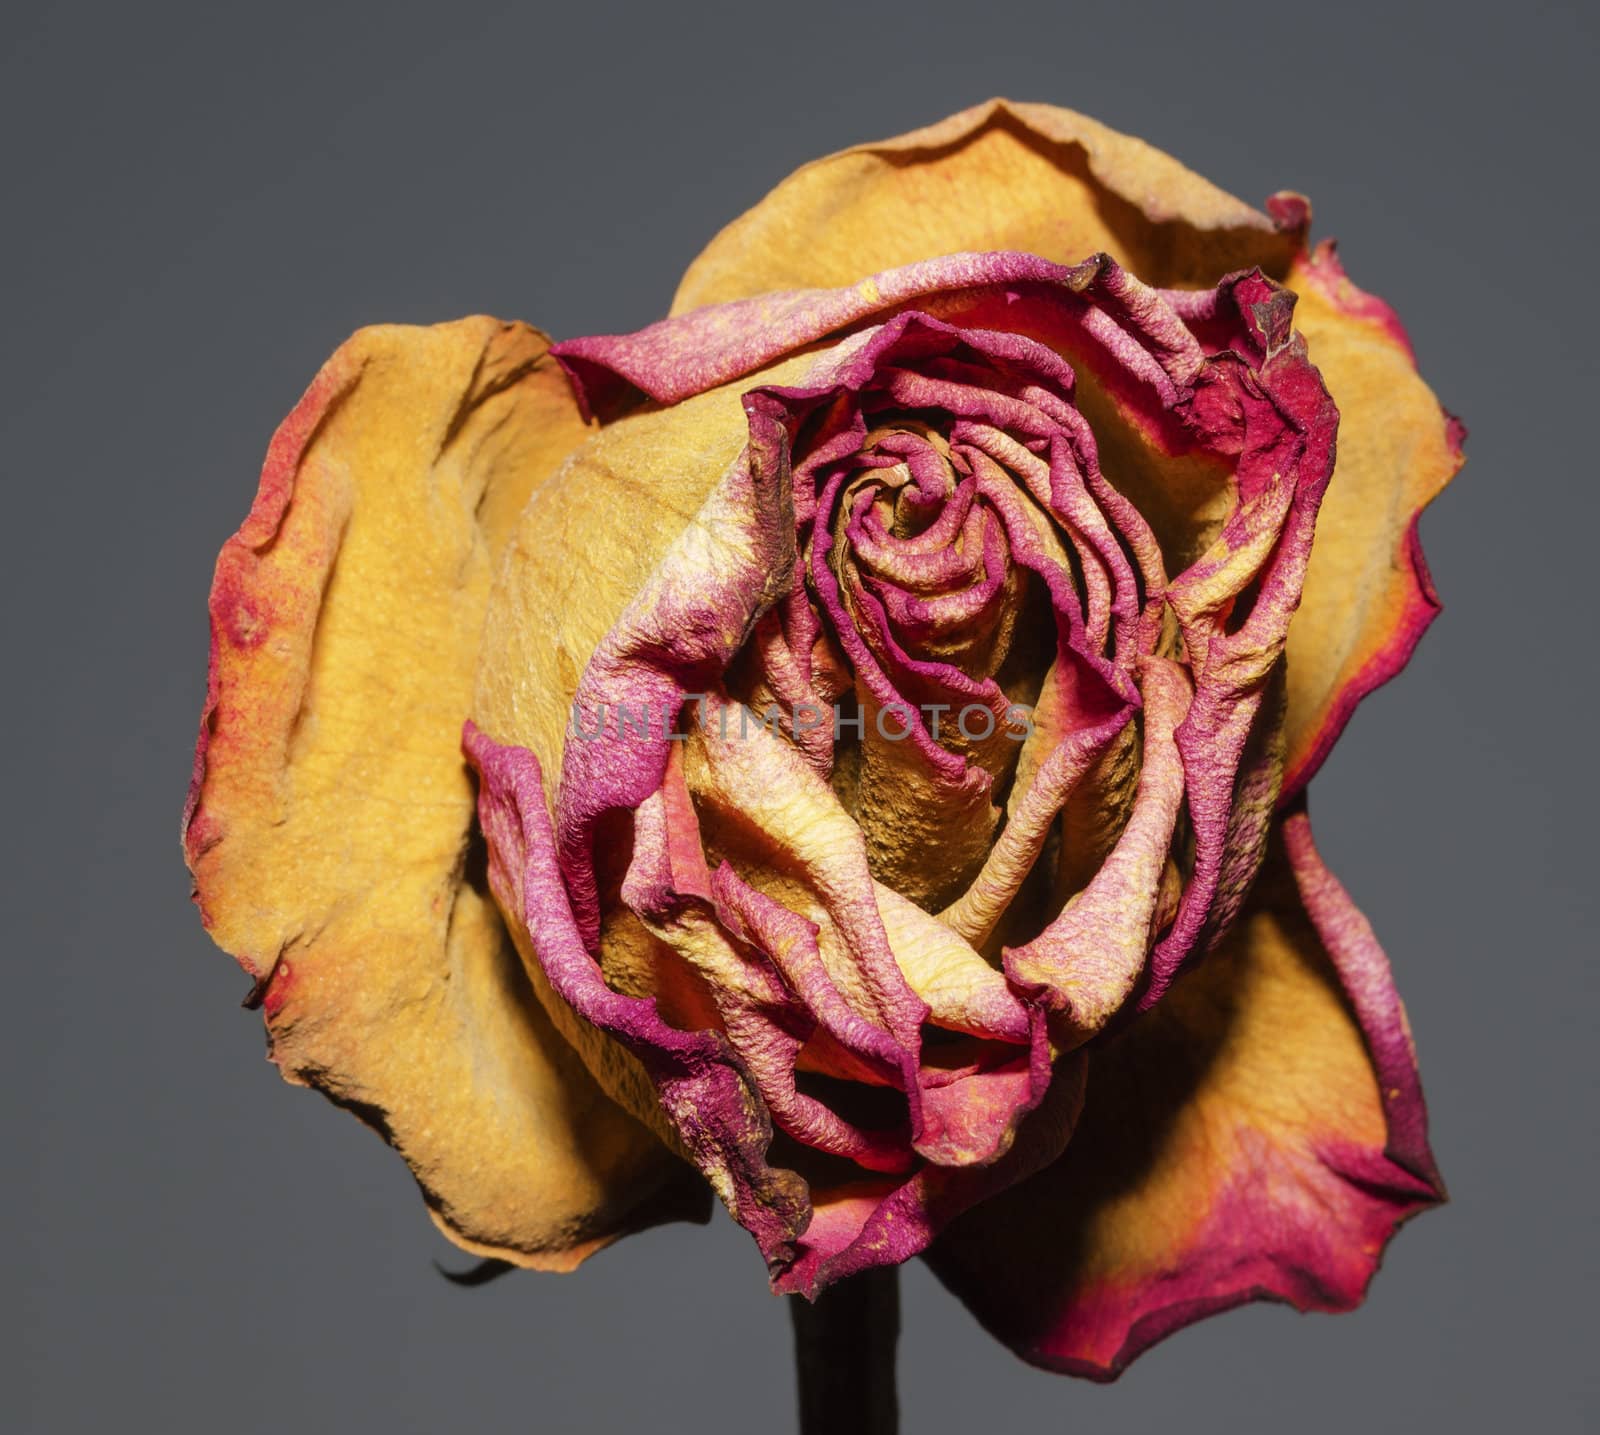 Whithered rose on gray background by nprause